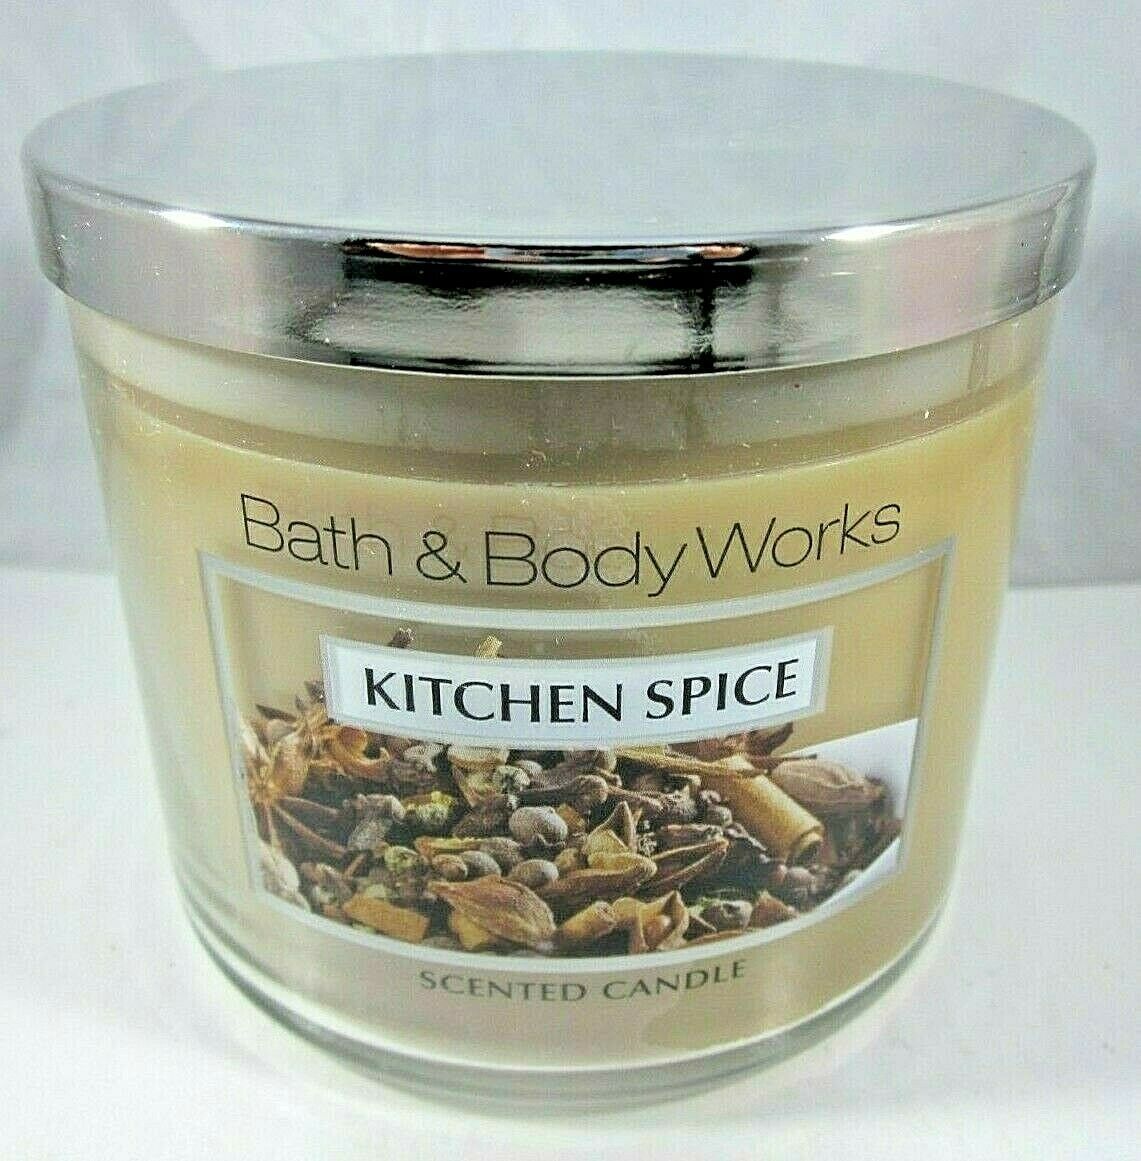 1 Bath & Body Works WINTER CLOVE Large Scented 3 Wick Candle 14.5 oz 